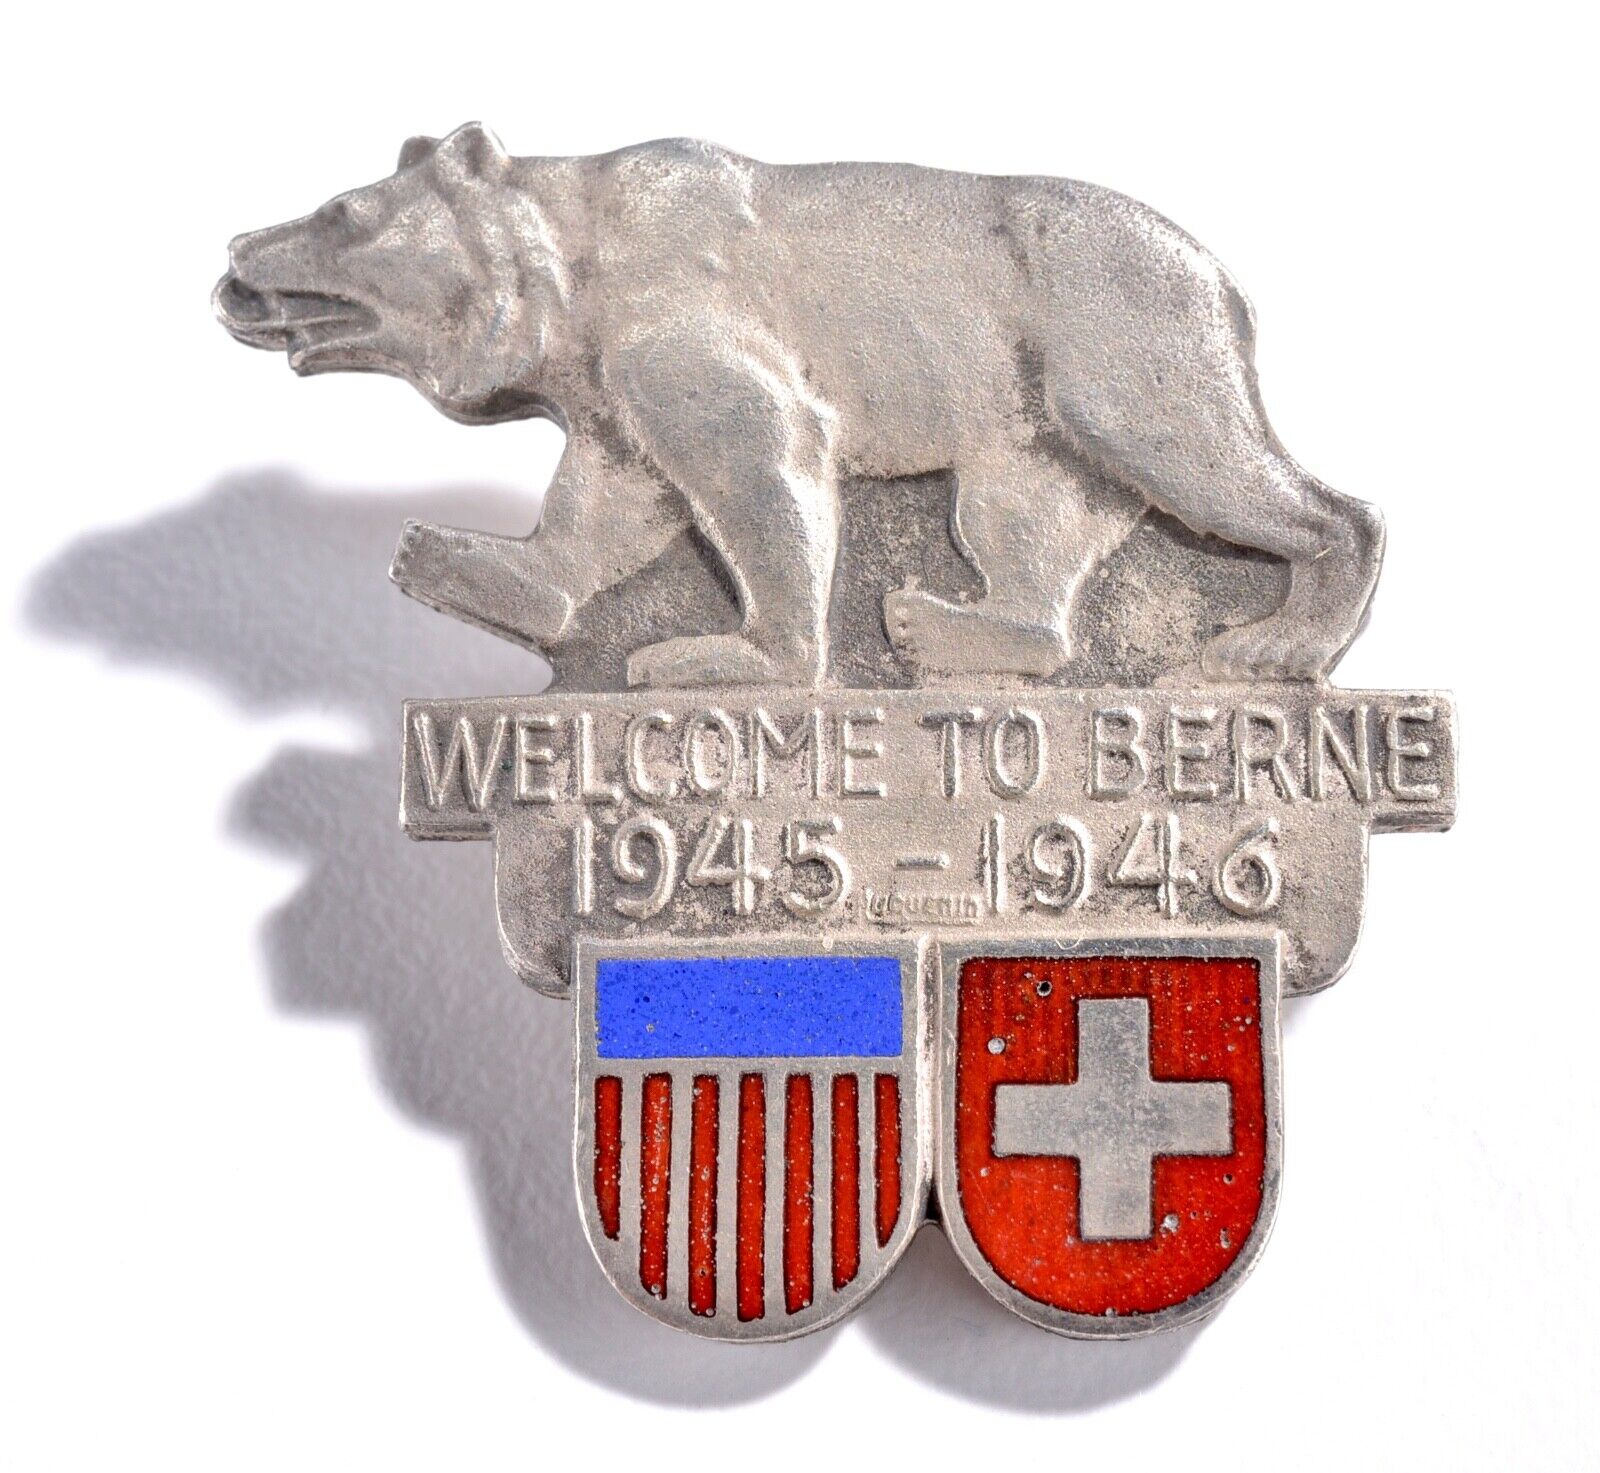 Vintage WWII Era “Welcome To Berne” Pin - 1945-1946 Silver Tone USA Switzerland